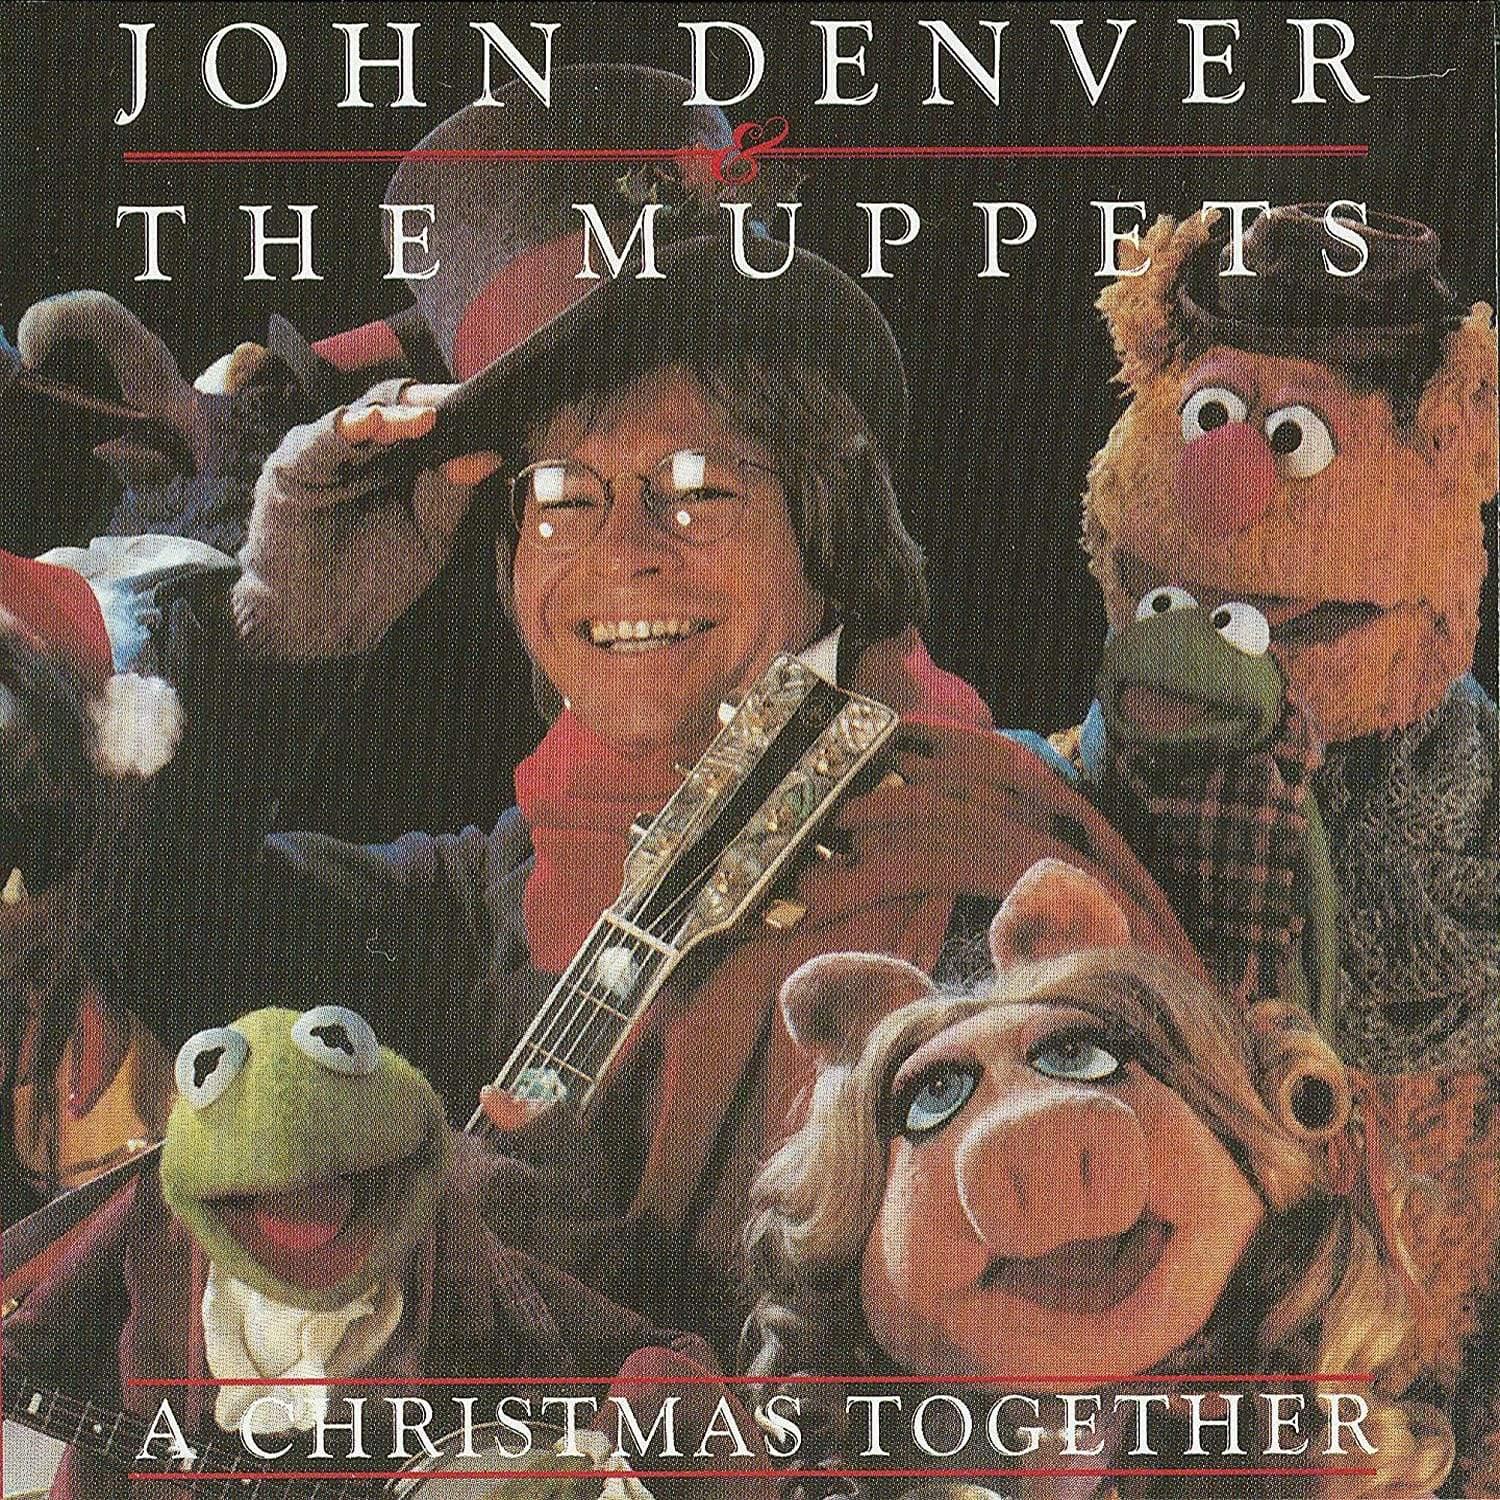 John Denver & The Muppets - A Christmas Together (Limited Edition, Indie Exclusive, Candy Cane Swirl Vinyl) (LP) - Joco Records